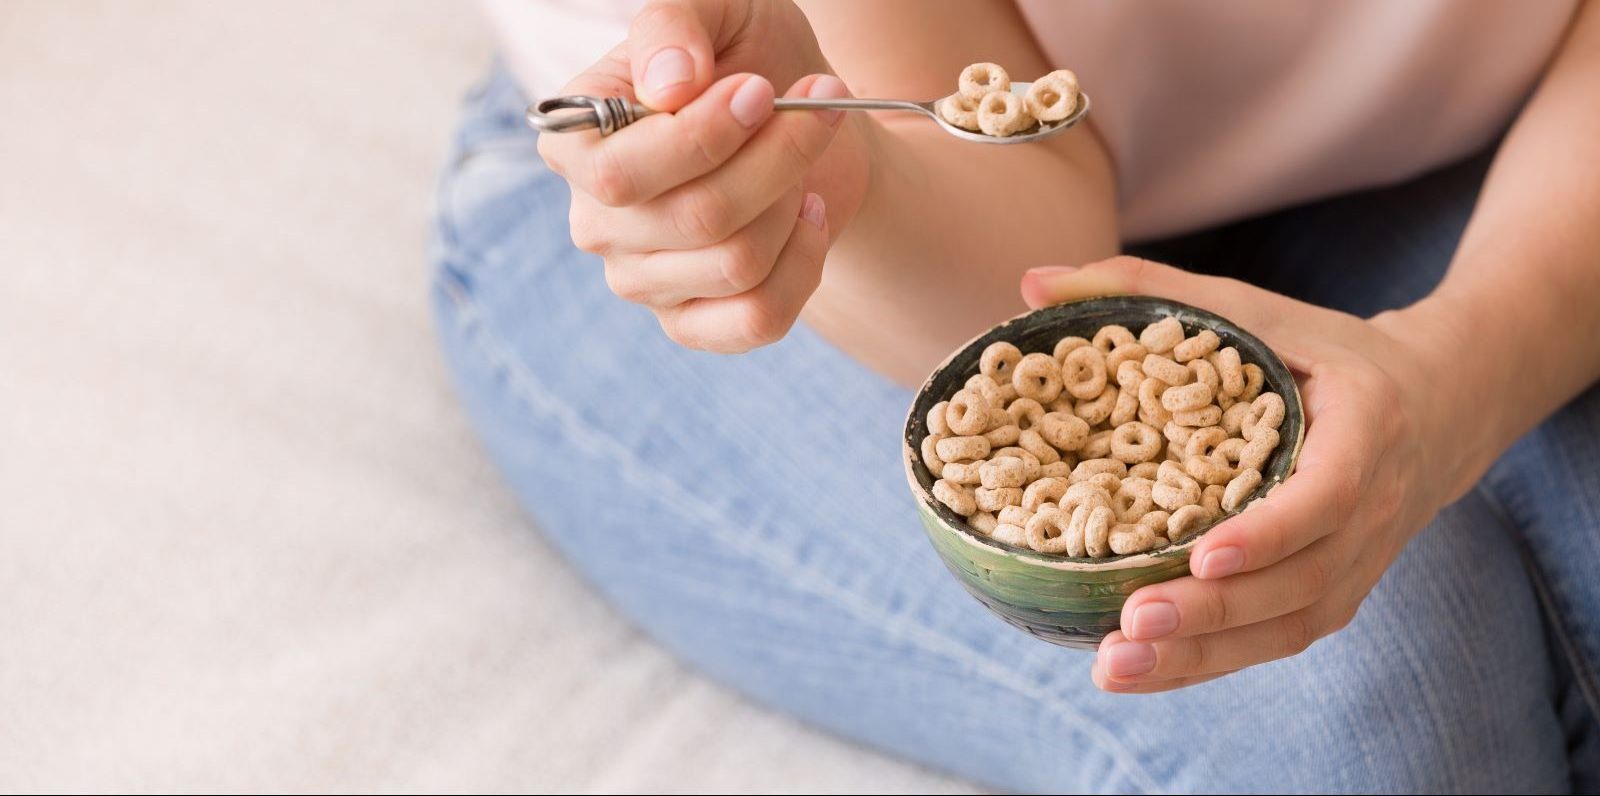 Do Cheerios really lower your cholesterol? Our expert weighs in with the answer - and a list of other foods that might help.